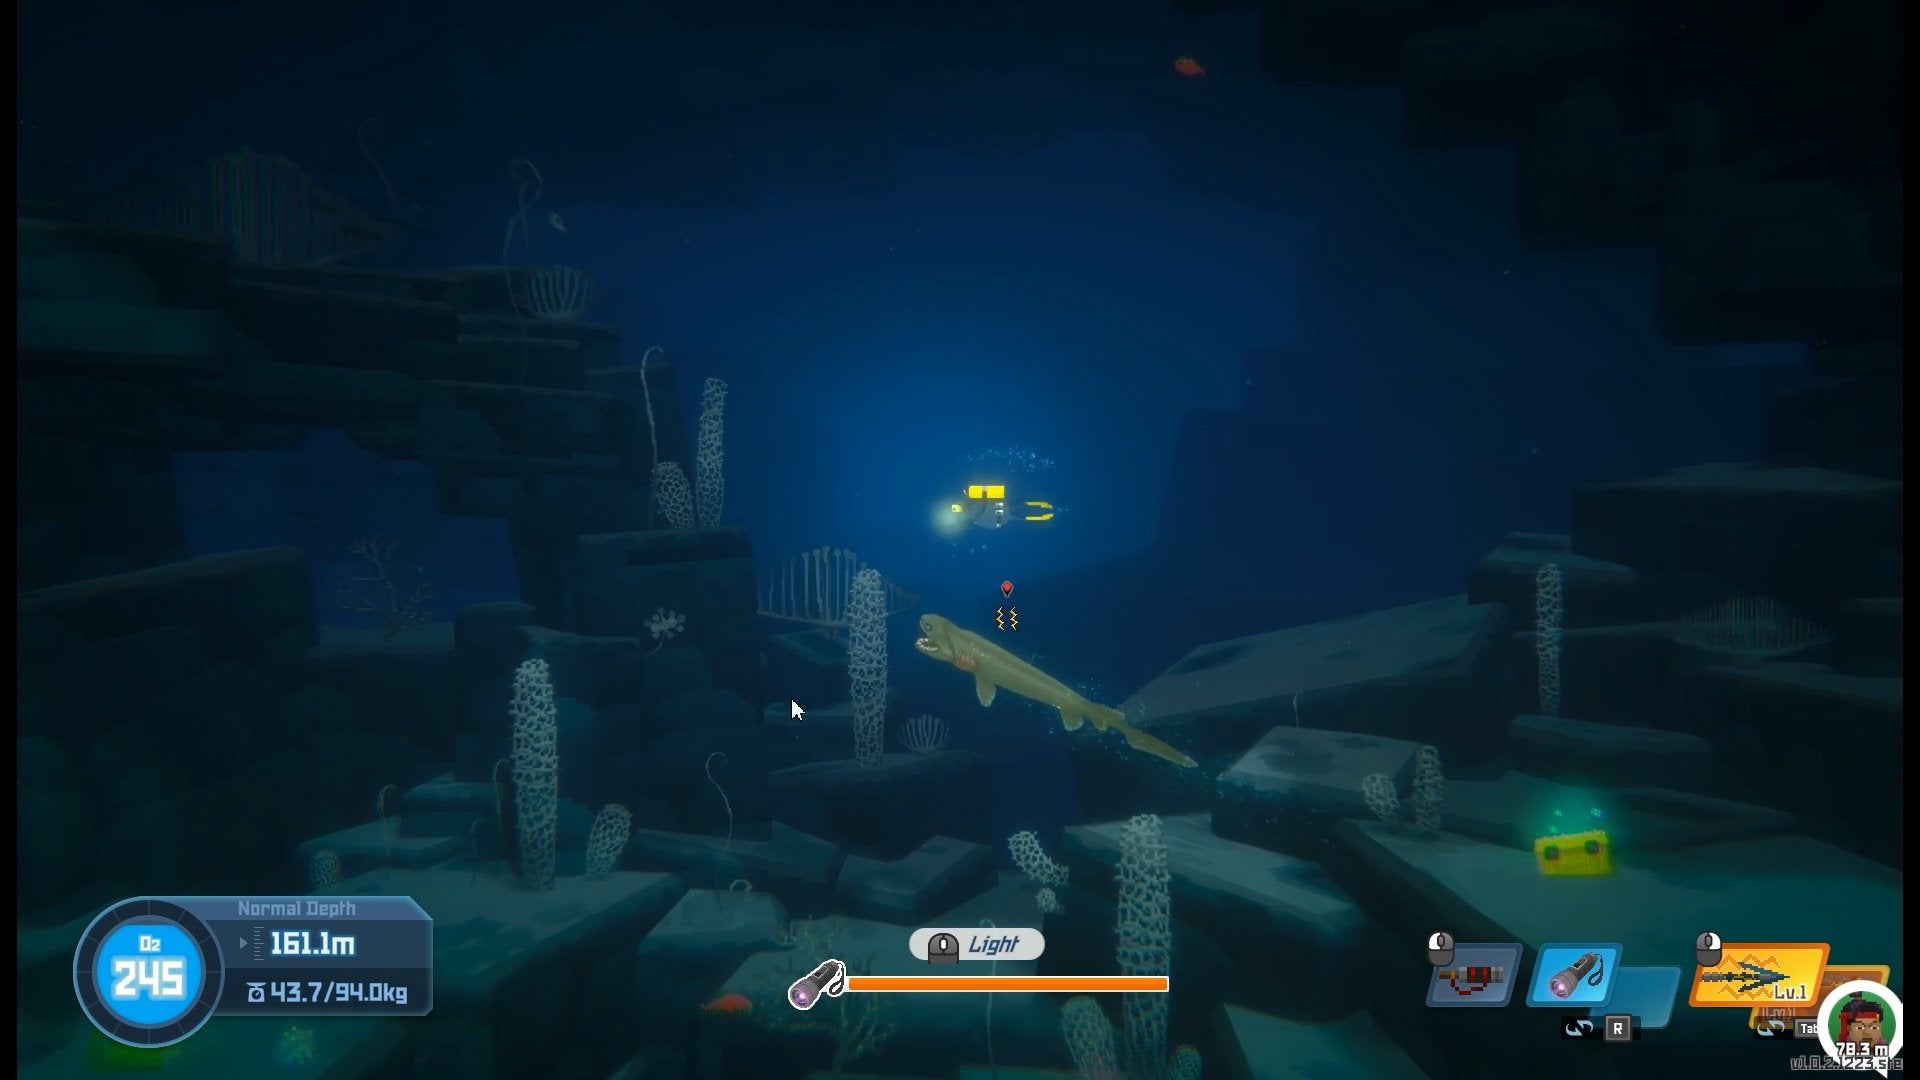 The player fighting a stunned Frilled Shark in Dave the Diver.